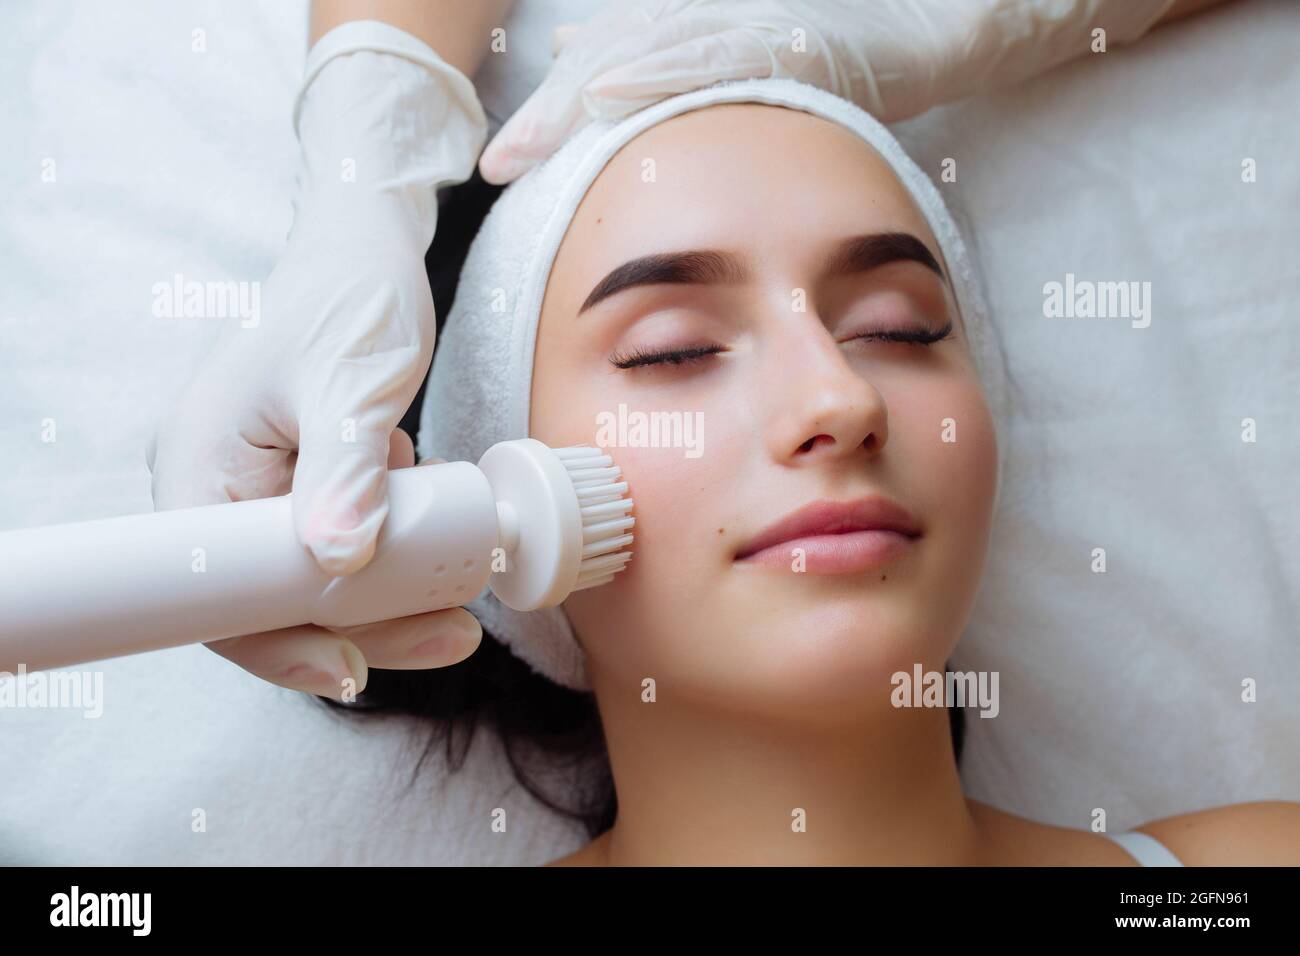 Facial massage. Care skin brushing spa procedure and cosmetology Stock Photo